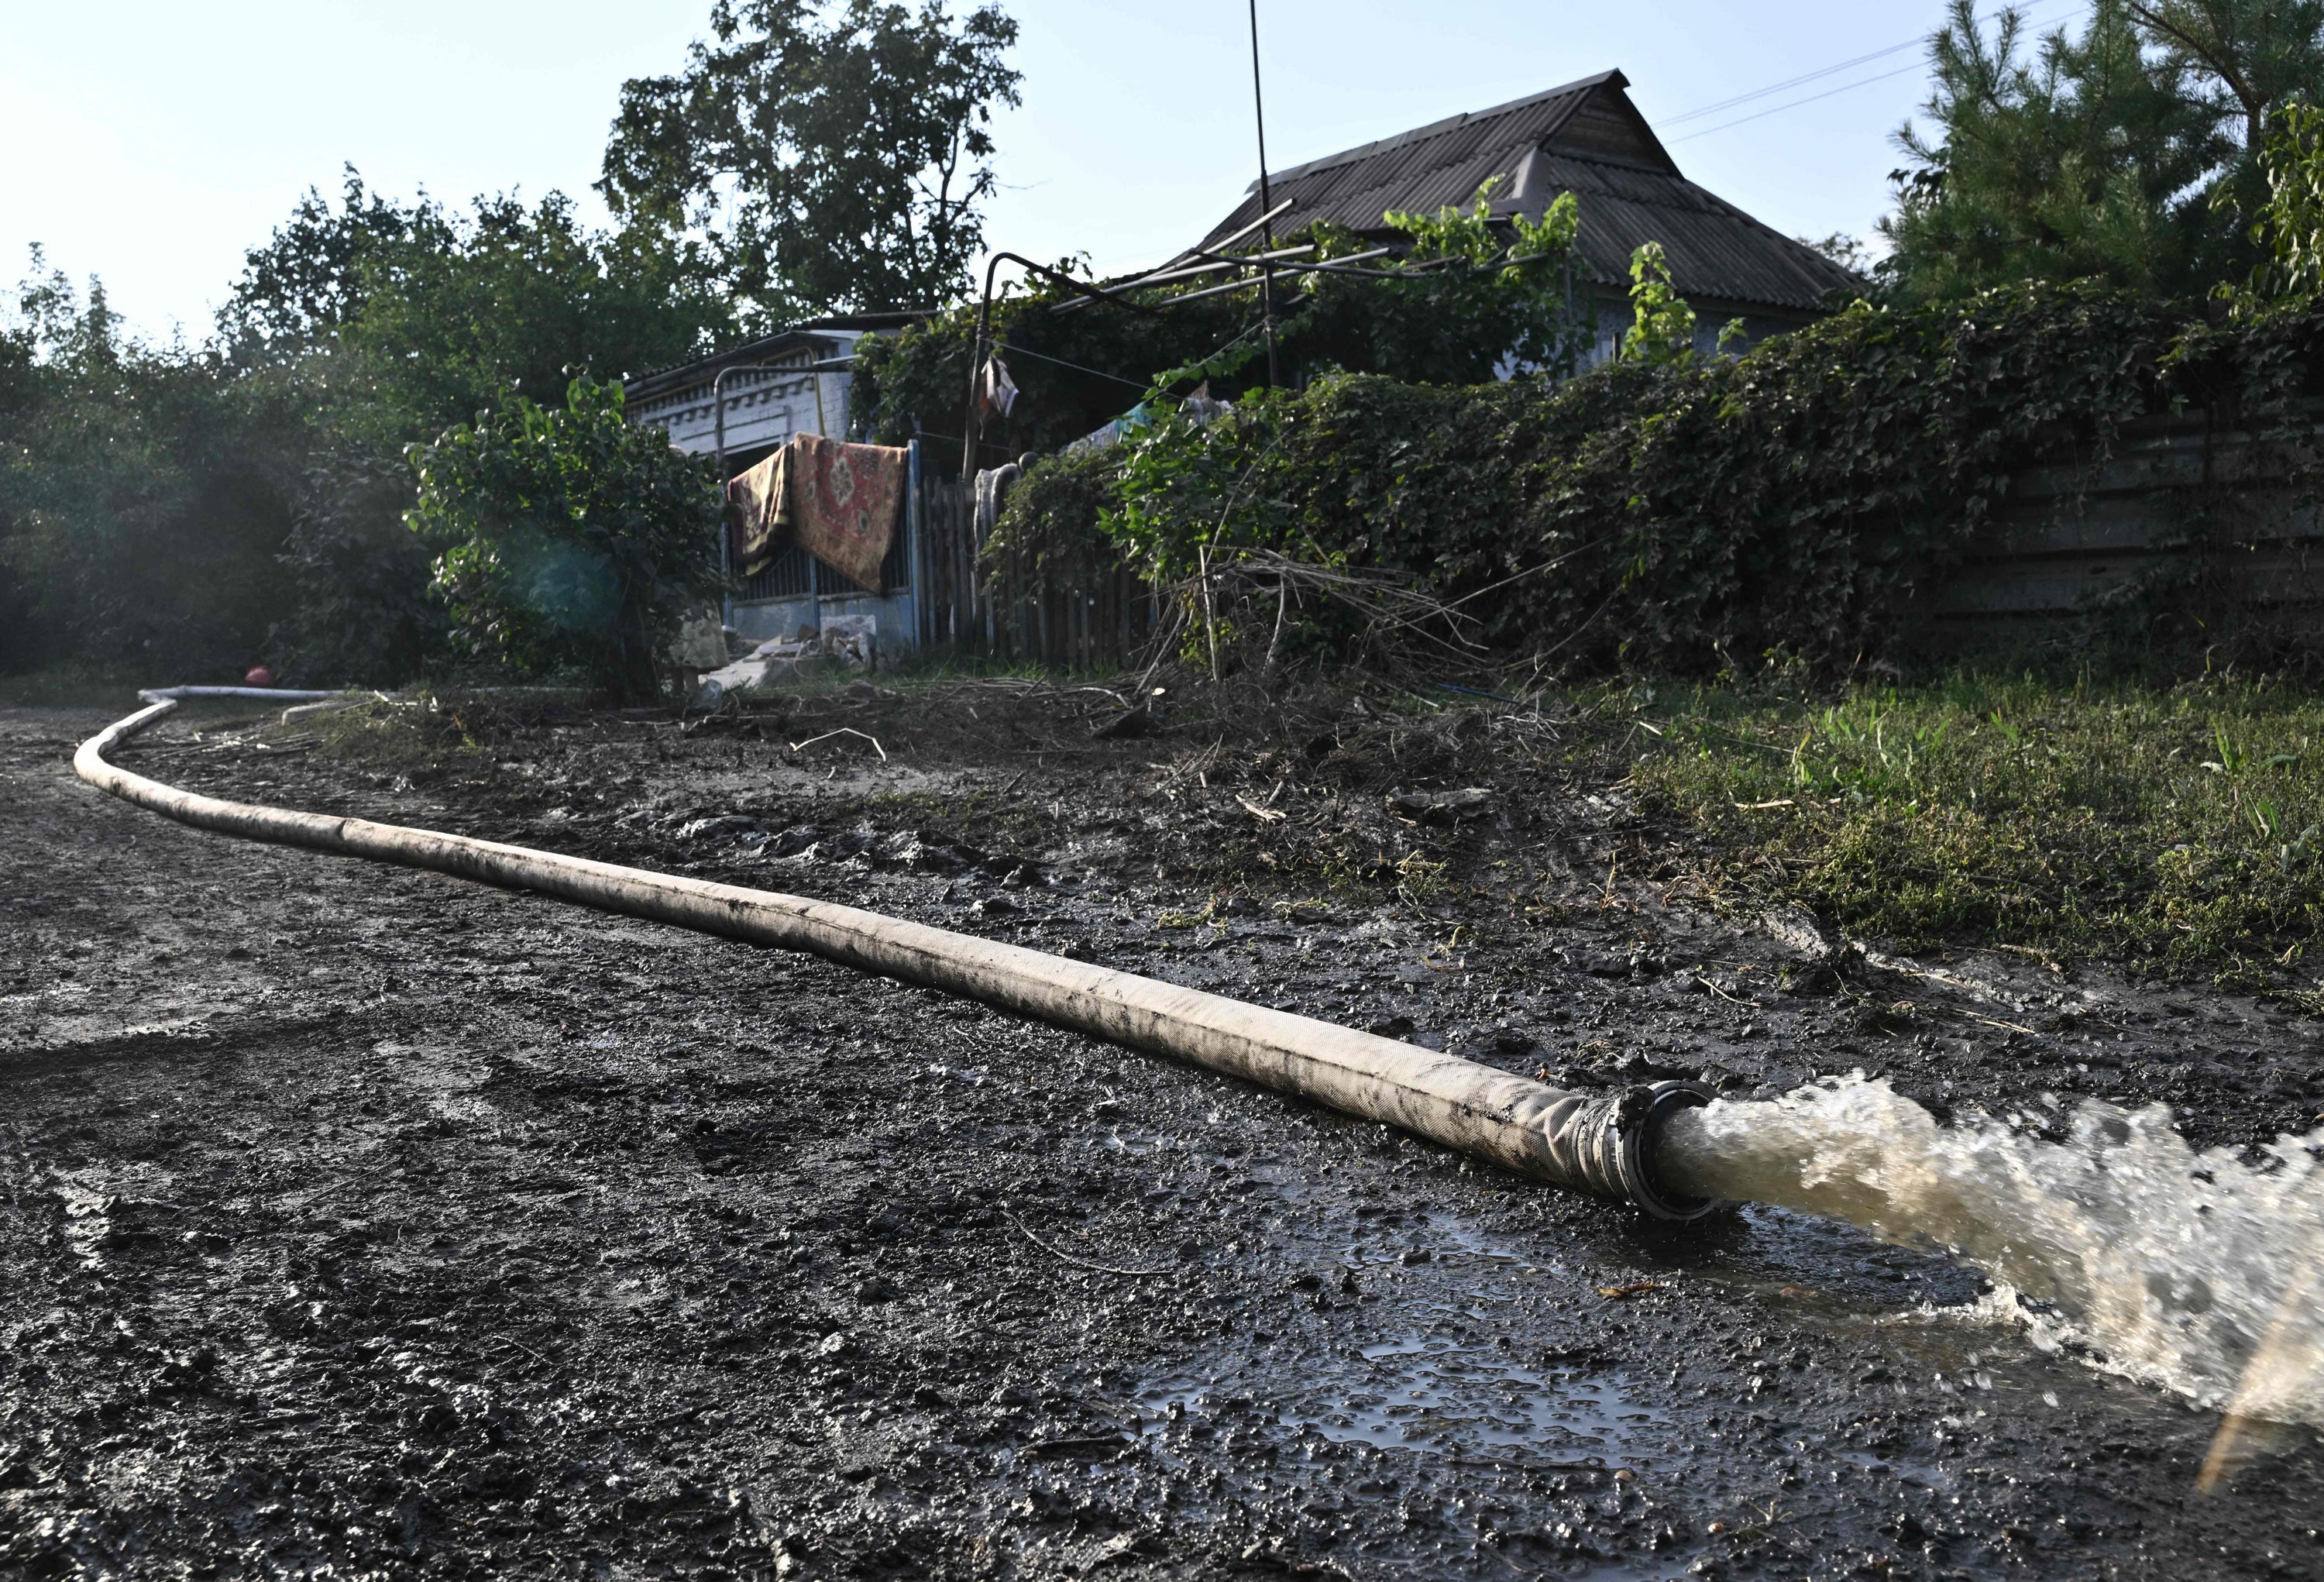 A hose pumps water out from a house in the town of Kryvyi Rih on Friday, where dozens of homes were flooded after a Russian attack damaged a dam upstream.